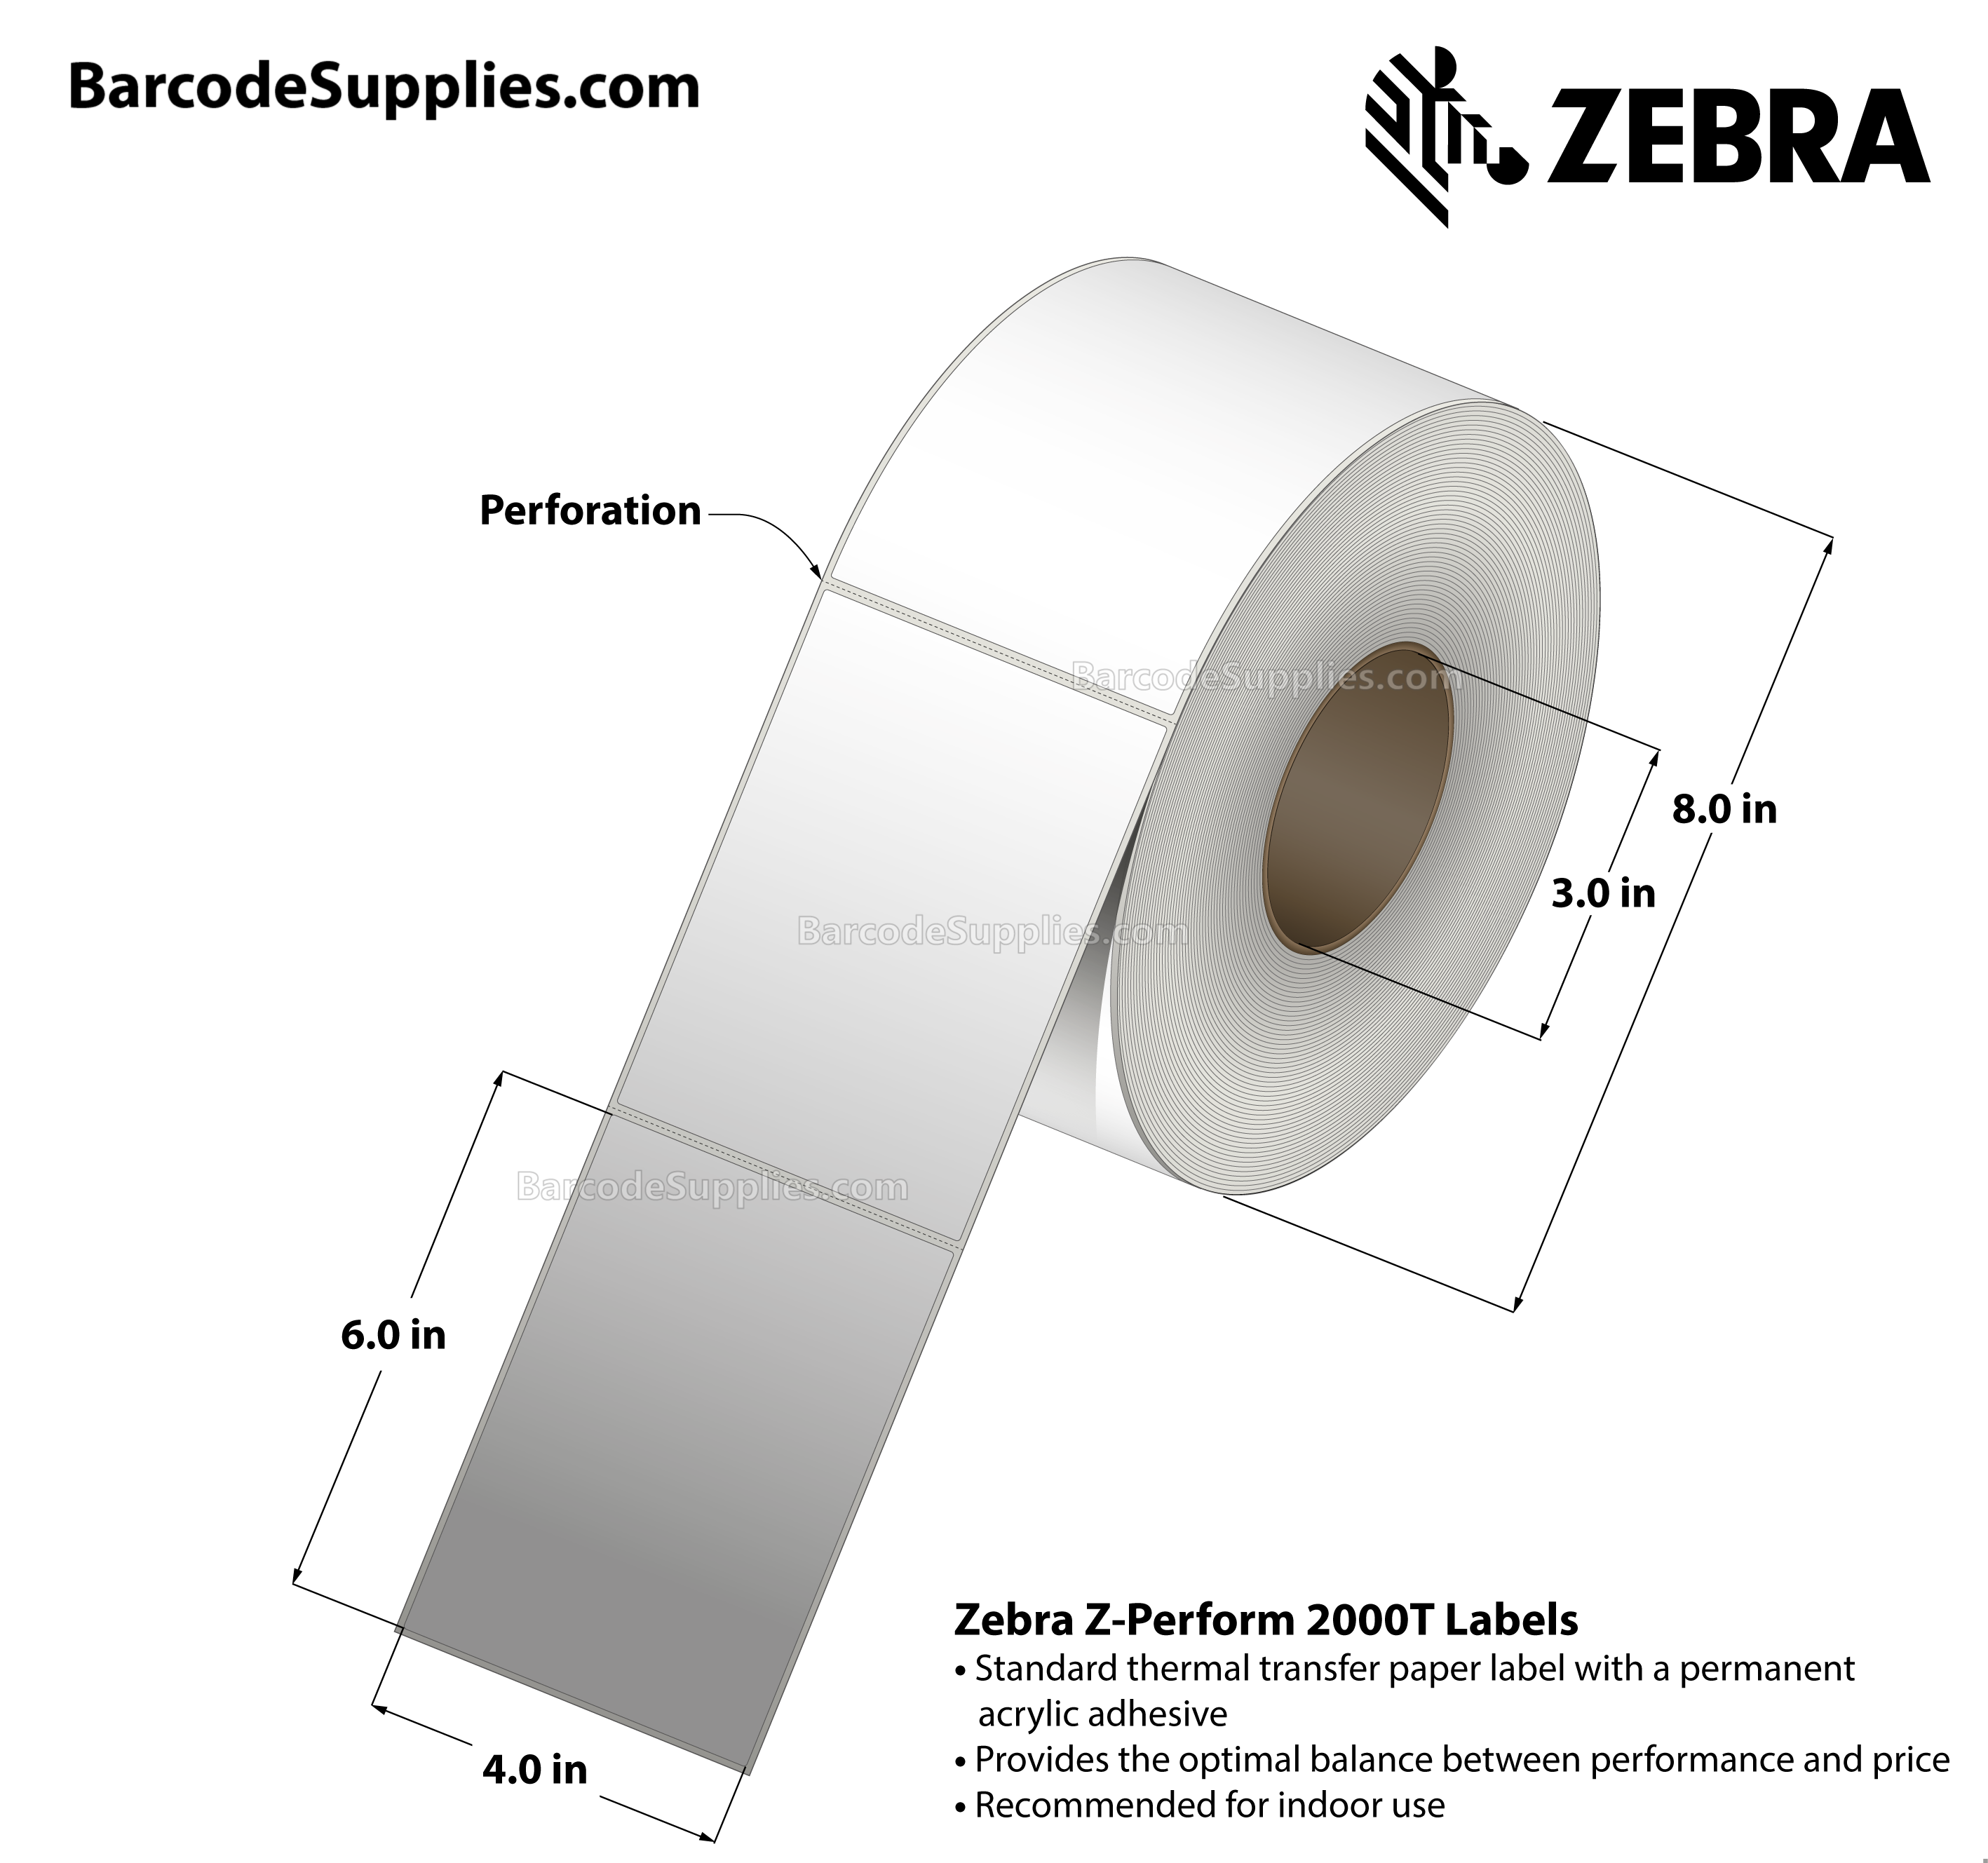 4 x 6 Thermal Transfer White Z-Perform 2000T Labels With Permanent Adhesive - Perforated - 1000 Labels Per Roll - Carton Of 4 Rolls - 4000 Labels Total - MPN: 10000281